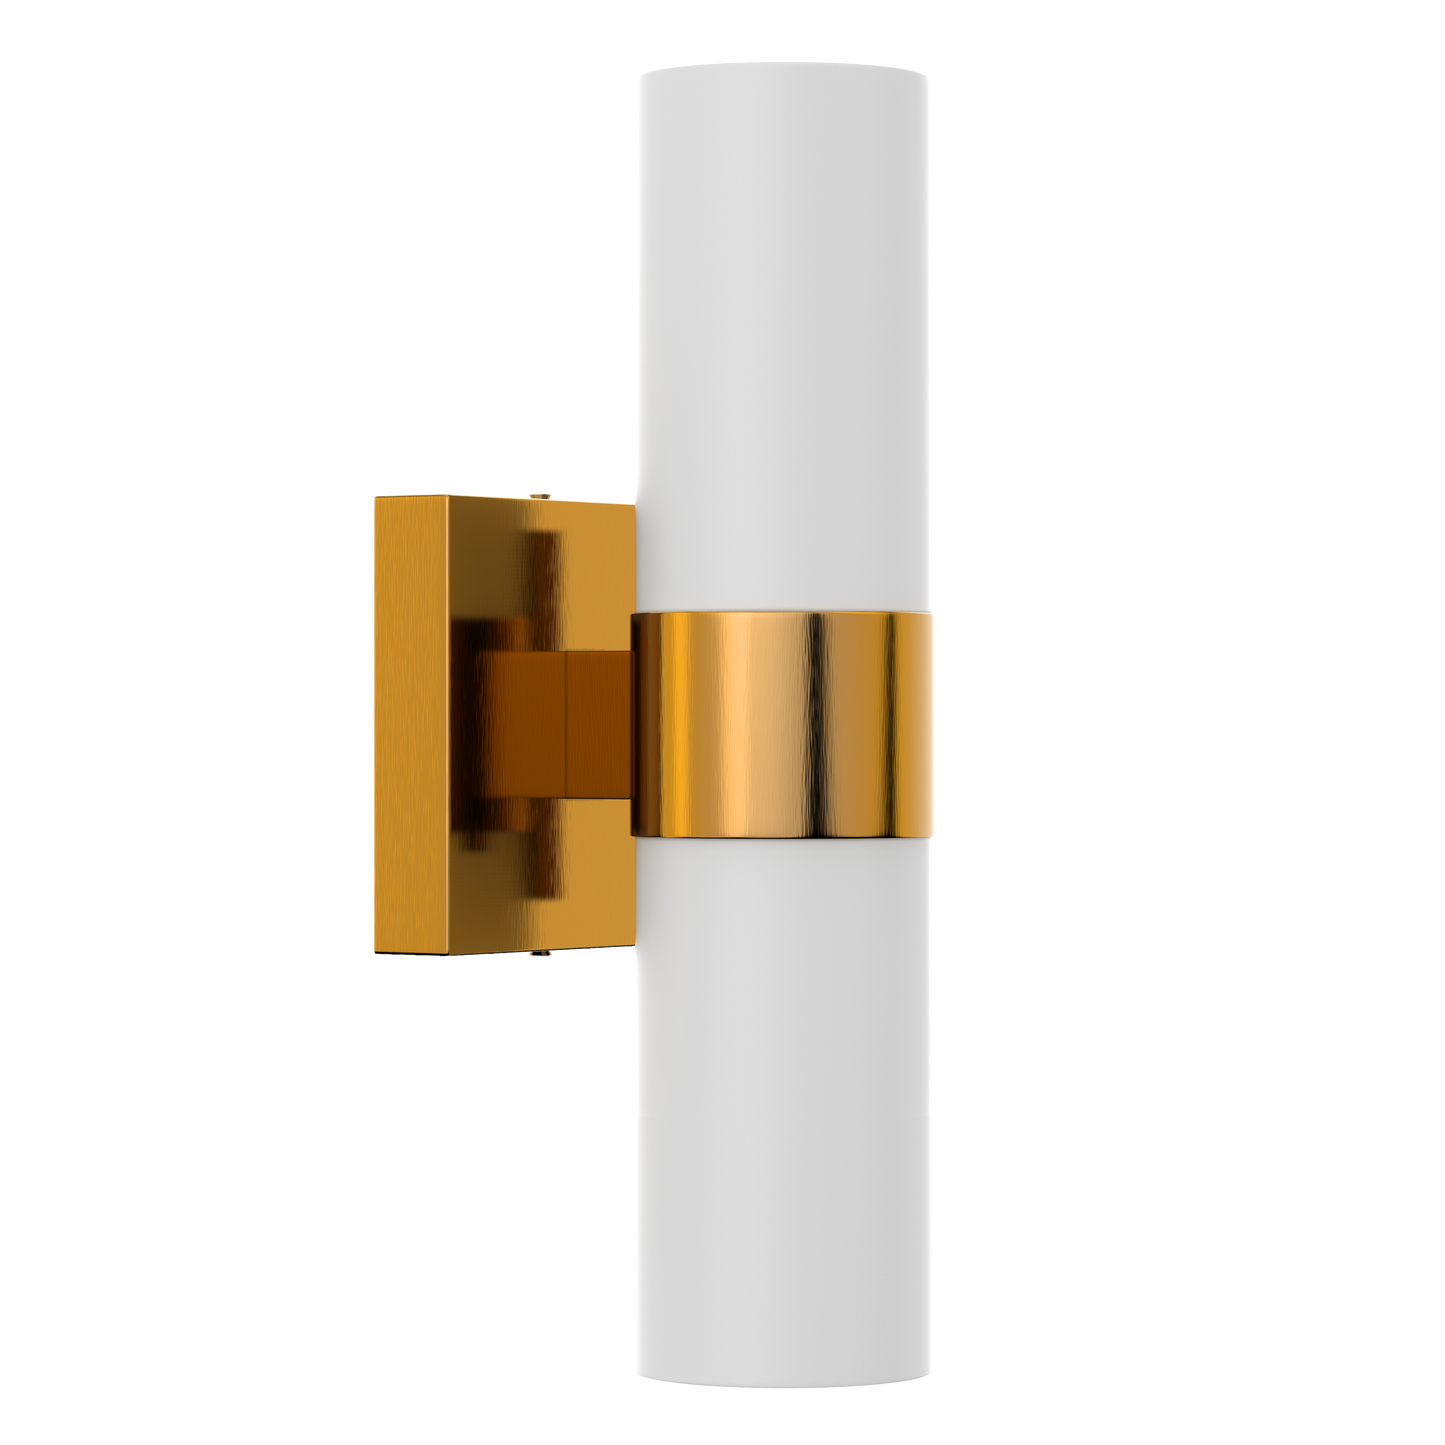 2-lights-wall-sconce-with-white-glass-shade